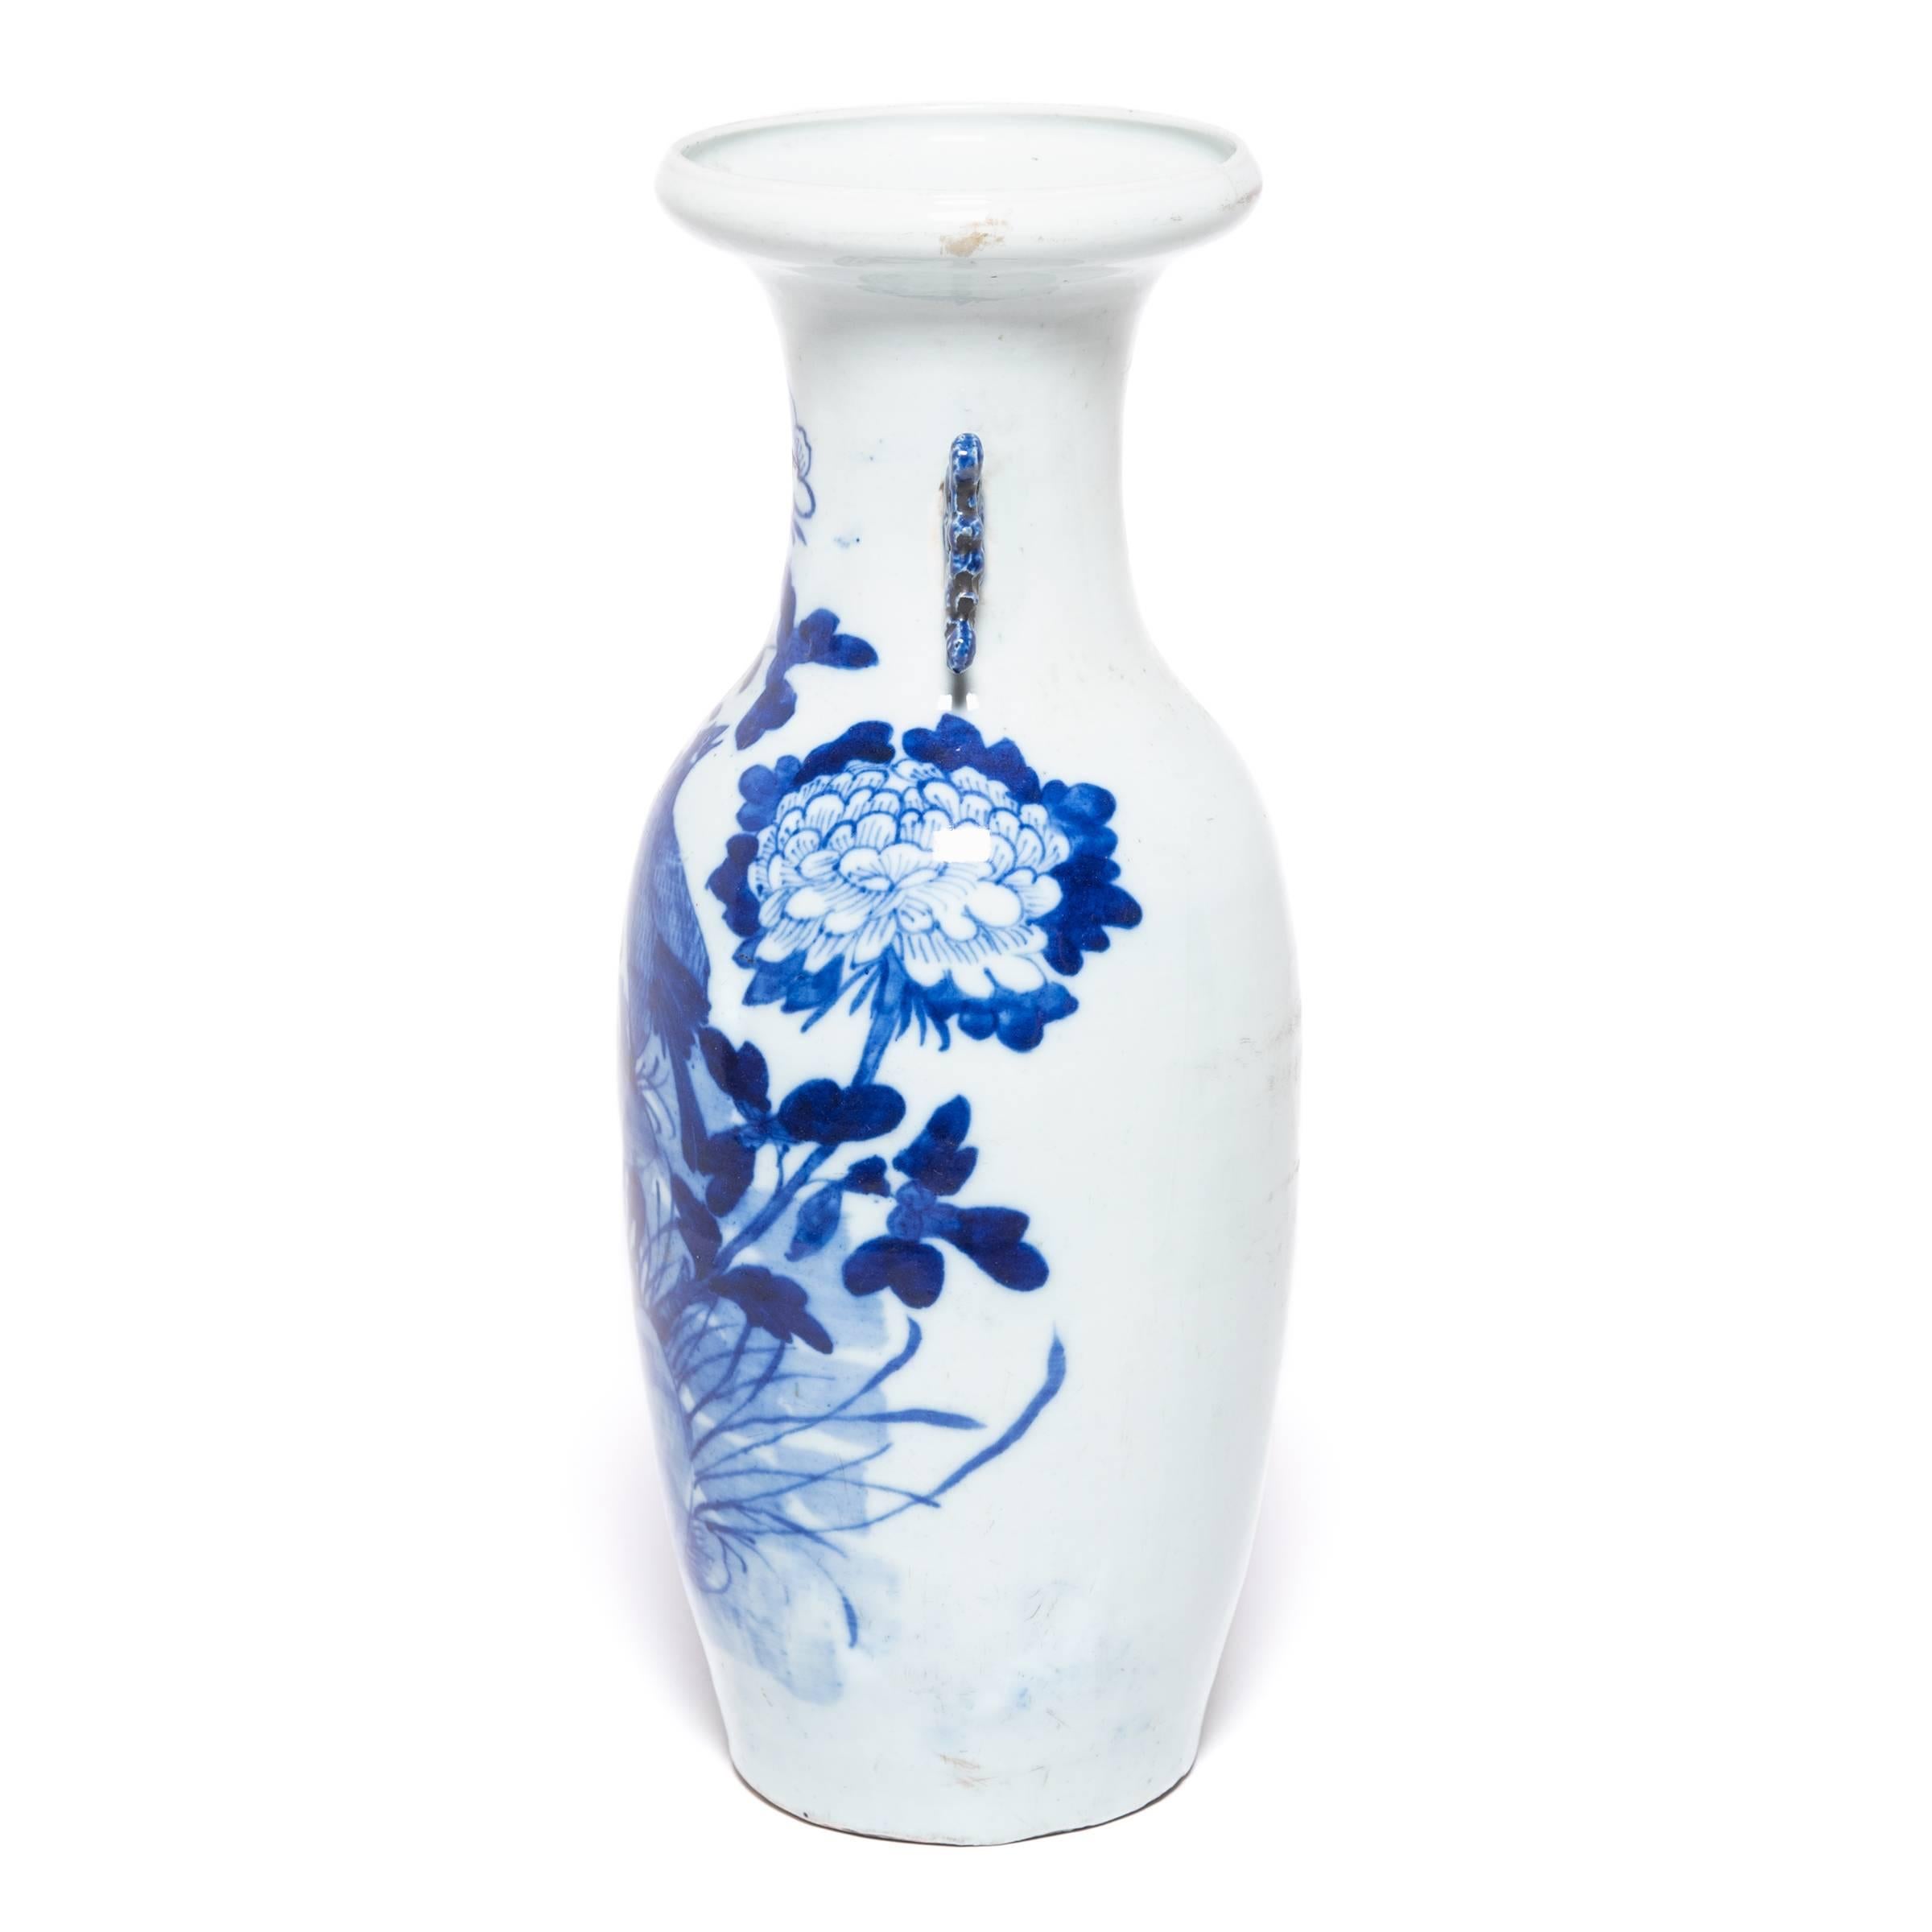 Replete with joyous symbols for a happy marriage, this white porcelain phoenix tail vase was likely given as a newlywed gift. Lavishly decorated with pale washes and deep pools of cobalt blue, the vase depicts a pair of magpies, symbols of double